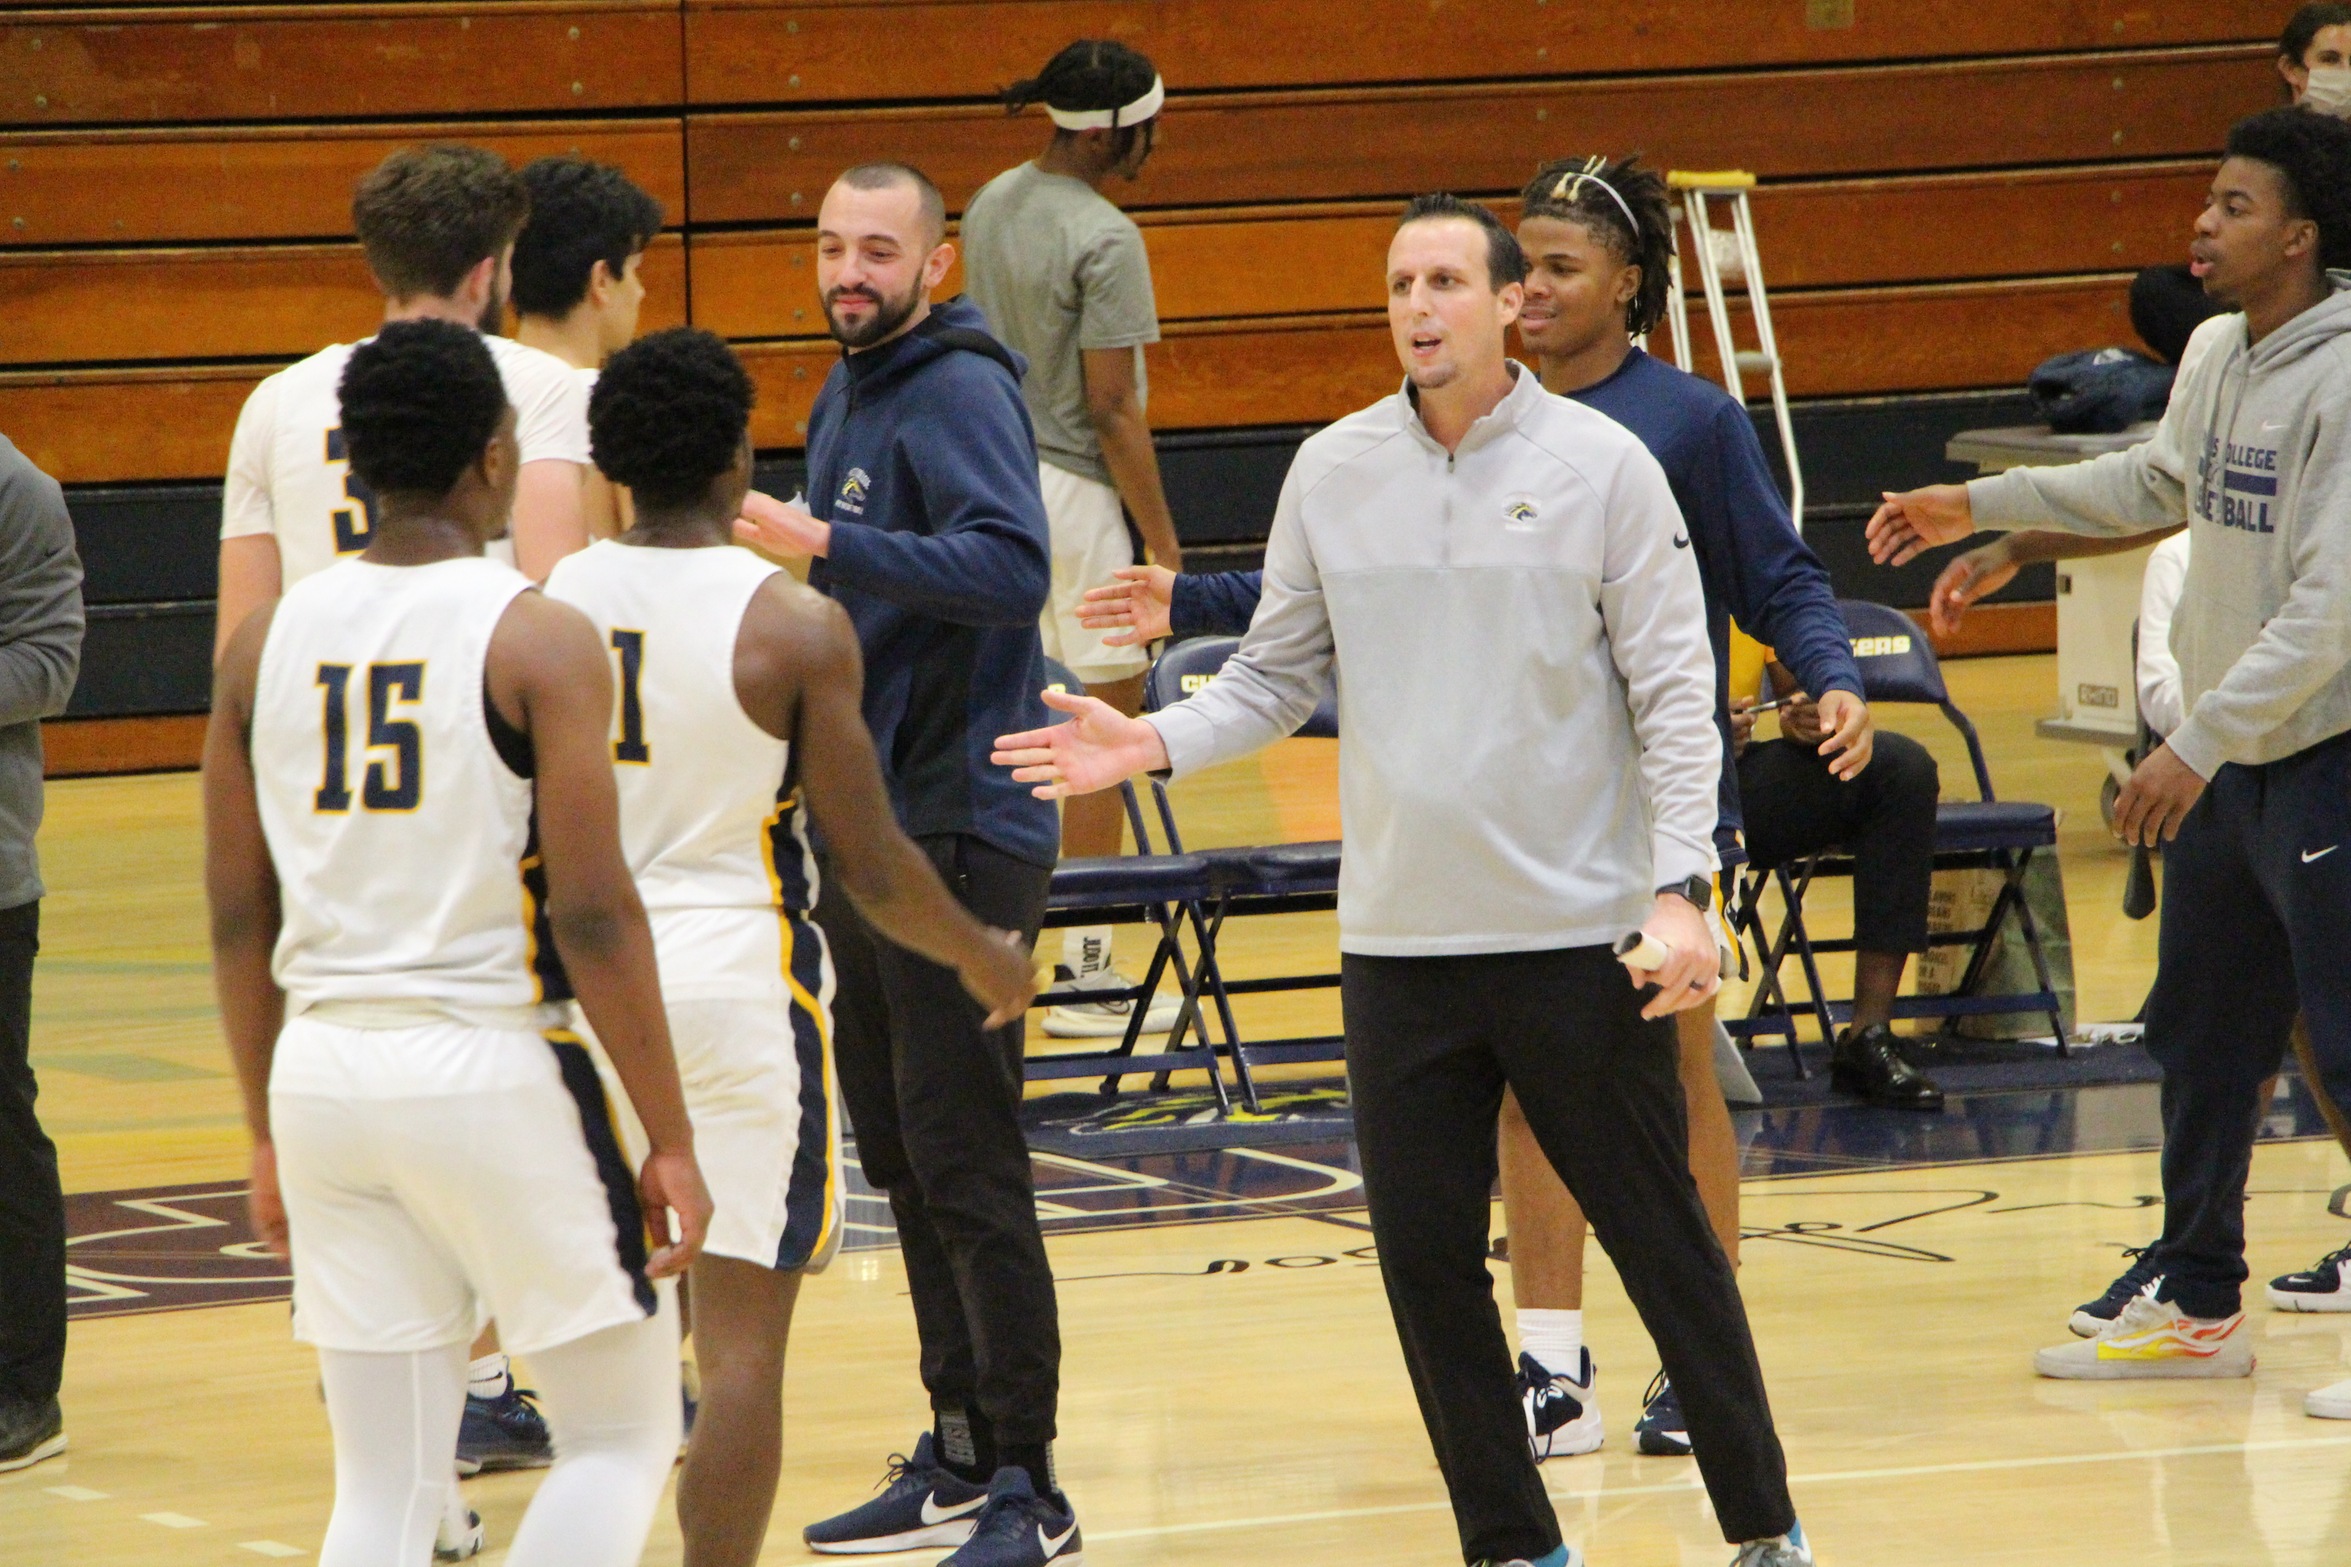 Coach Alhadeff Earns 100th Win in Victory Over Golden West